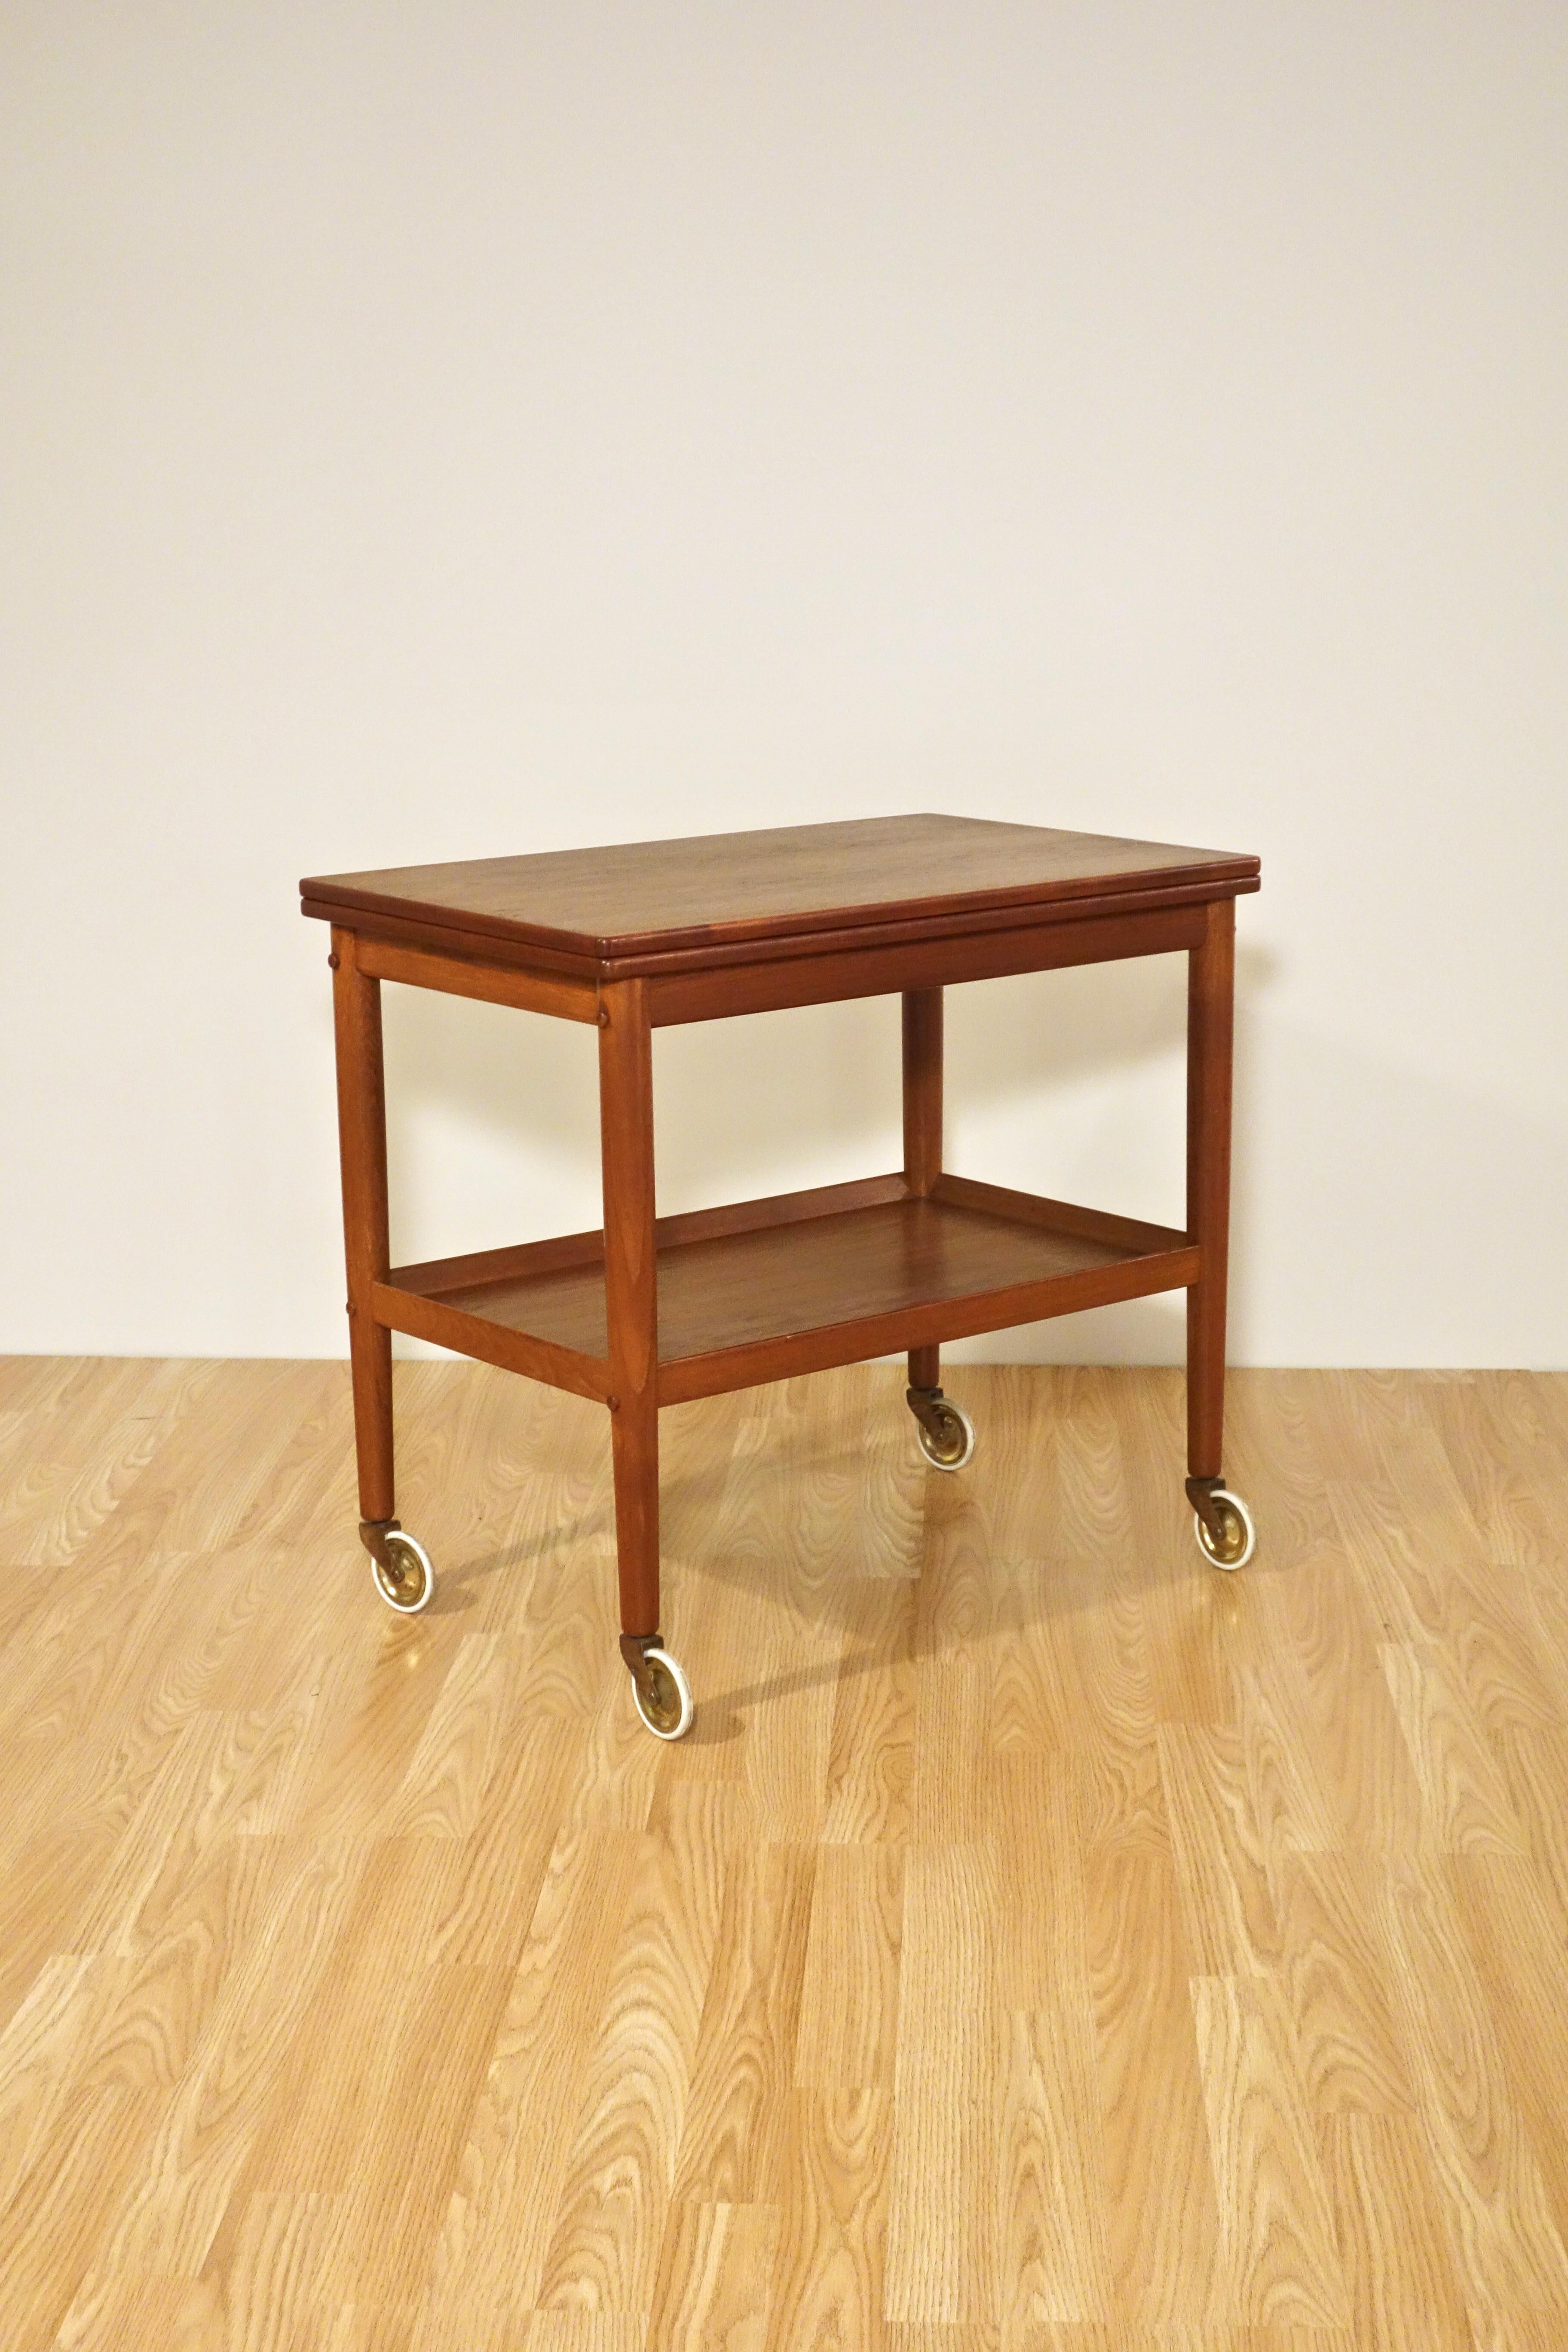 Scandinavian server by Grete Jalk for Poul Jeppesens

Danish manufacture dating from the 1960's, very beautifully made in light Rosewood.

Stamped under the top, this model is a classic signed by one of the greatest Danish designers of the